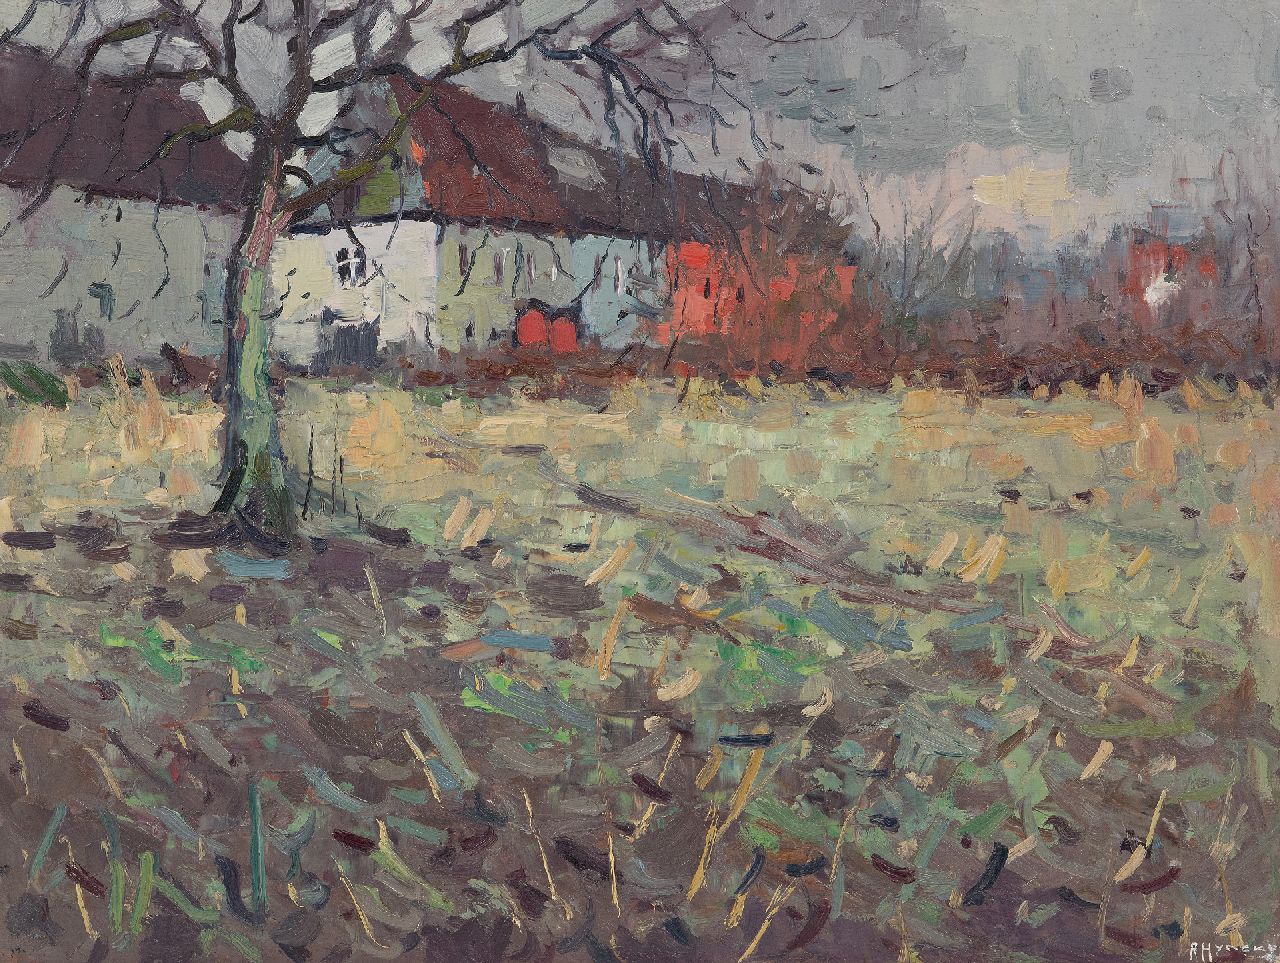 Hynckes R.  | Raoul Hynckes | Paintings offered for sale | Audergem near Brussels, oil on panel 42.1 x 55.8 cm, signed l.r.